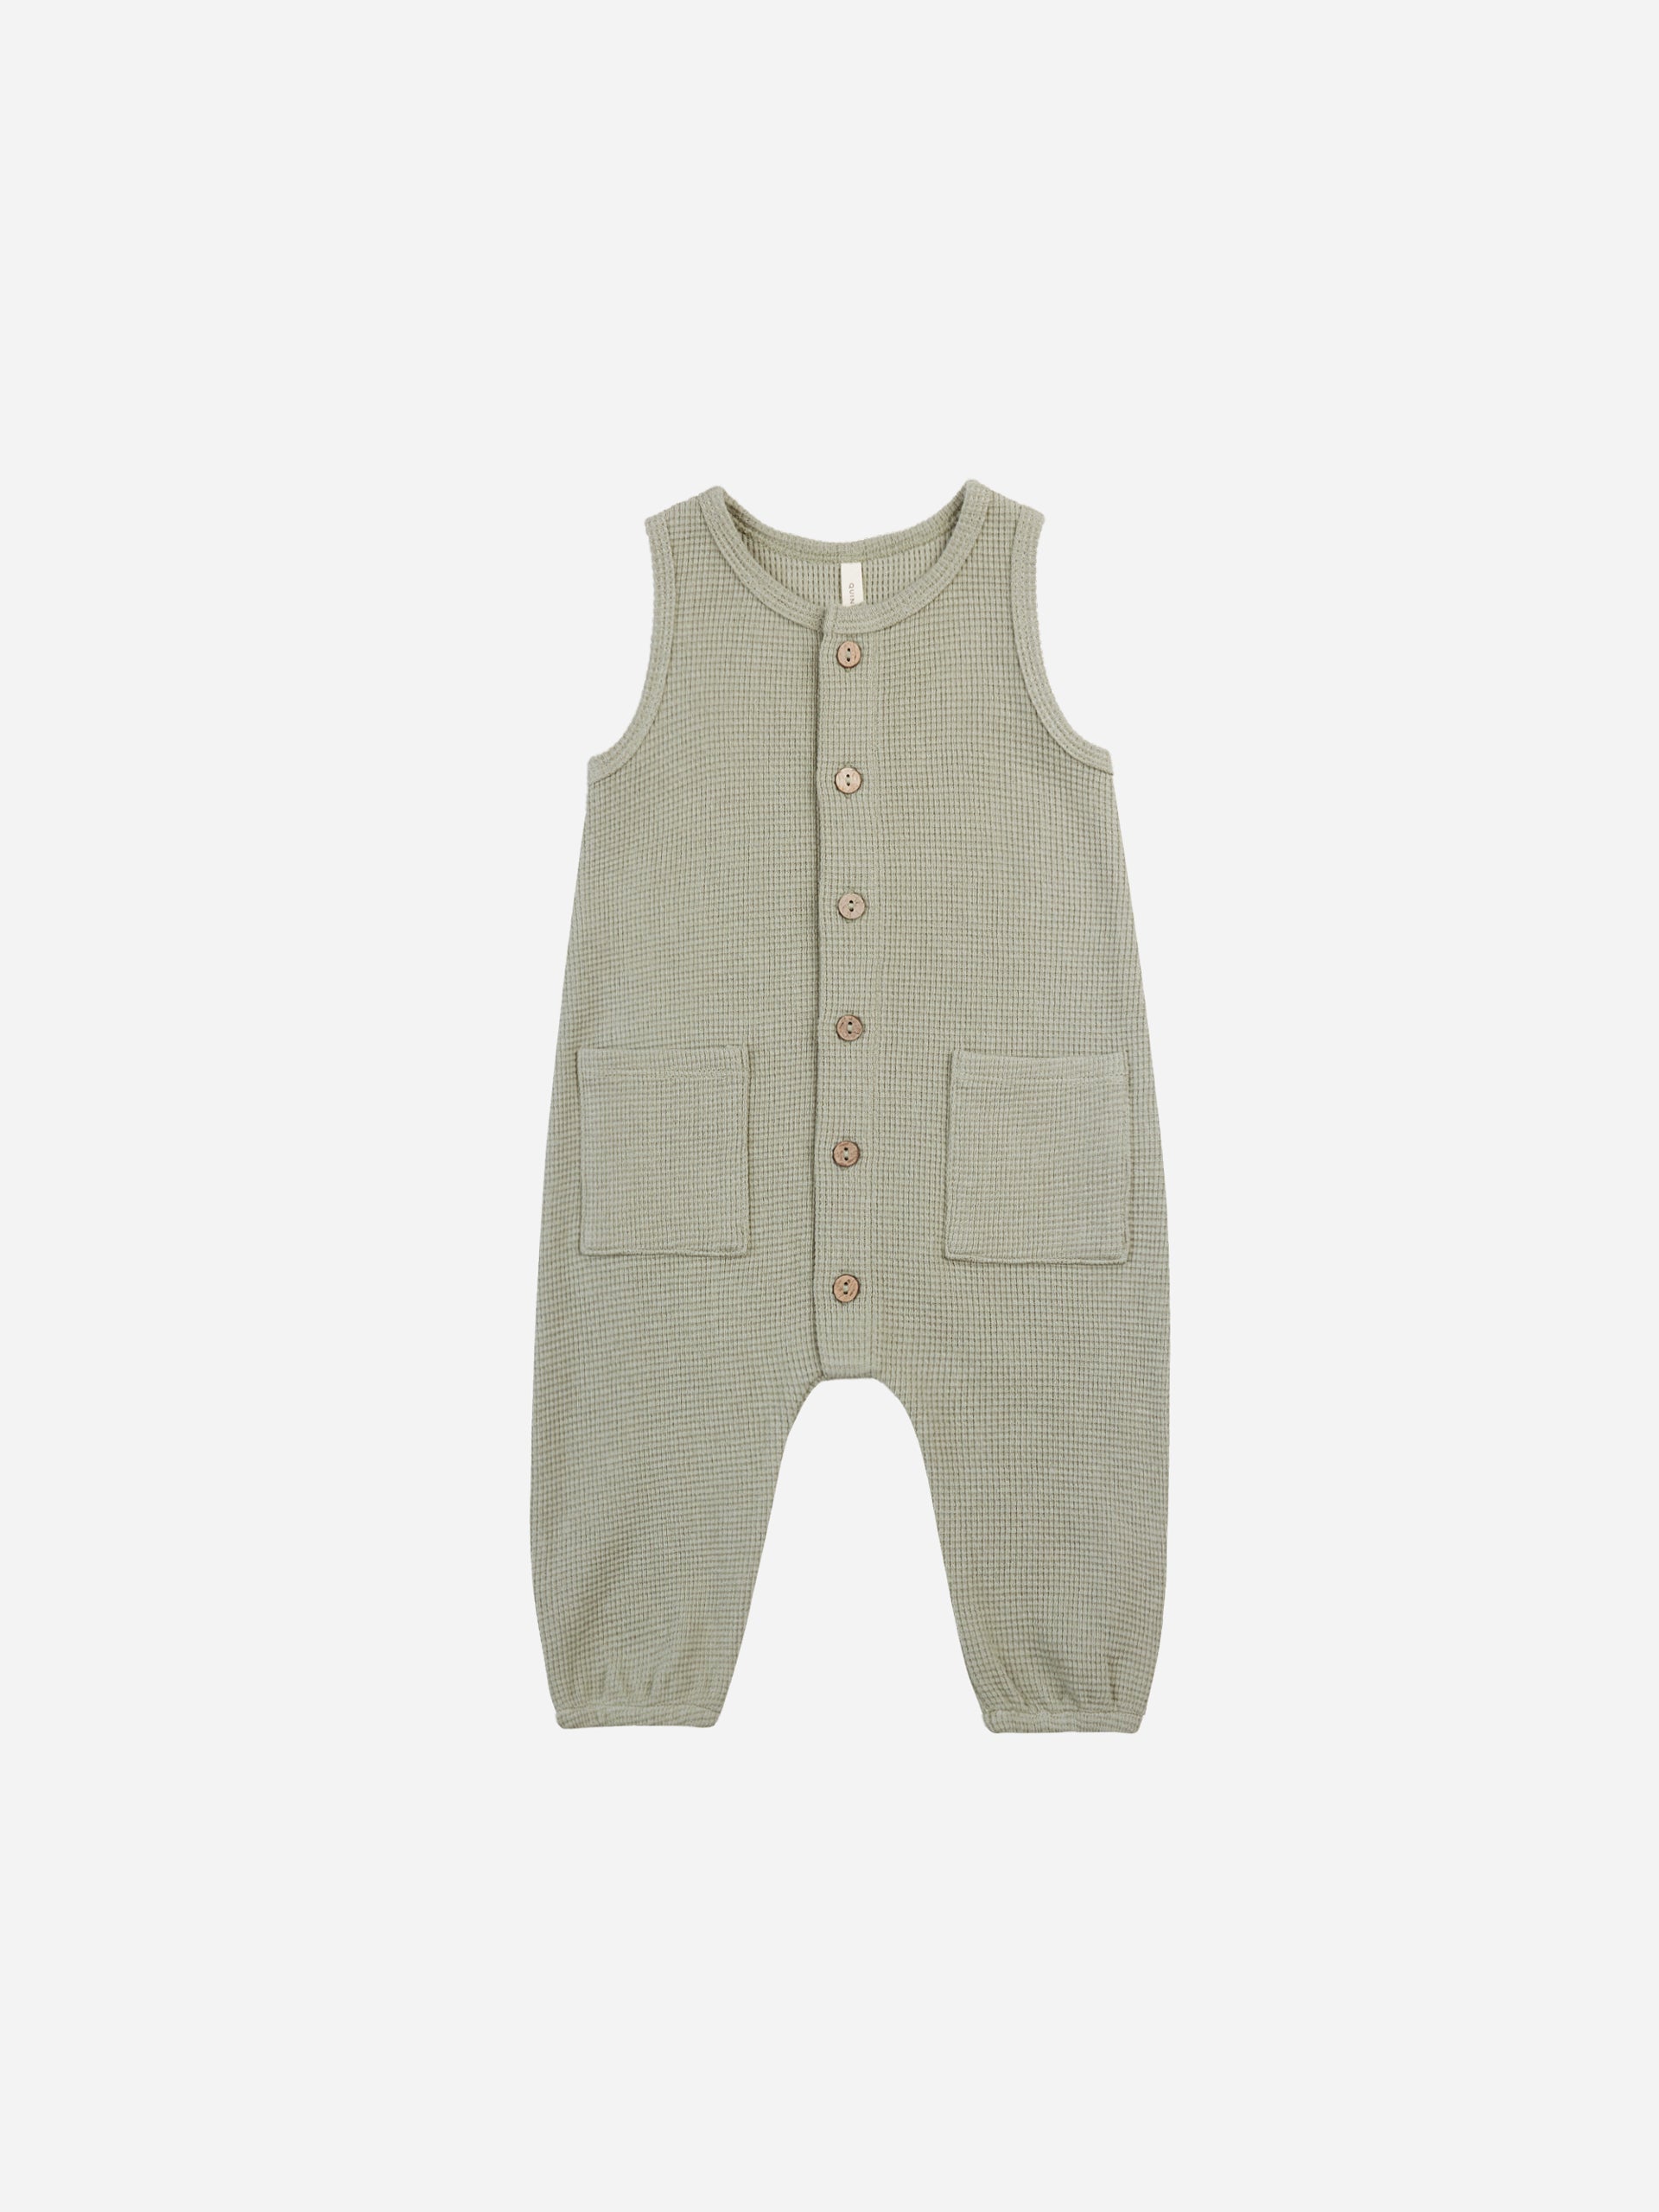 Waffle Jumpsuit || Sage - Rylee + Cru | Kids Clothes | Trendy Baby Clothes | Modern Infant Outfits |